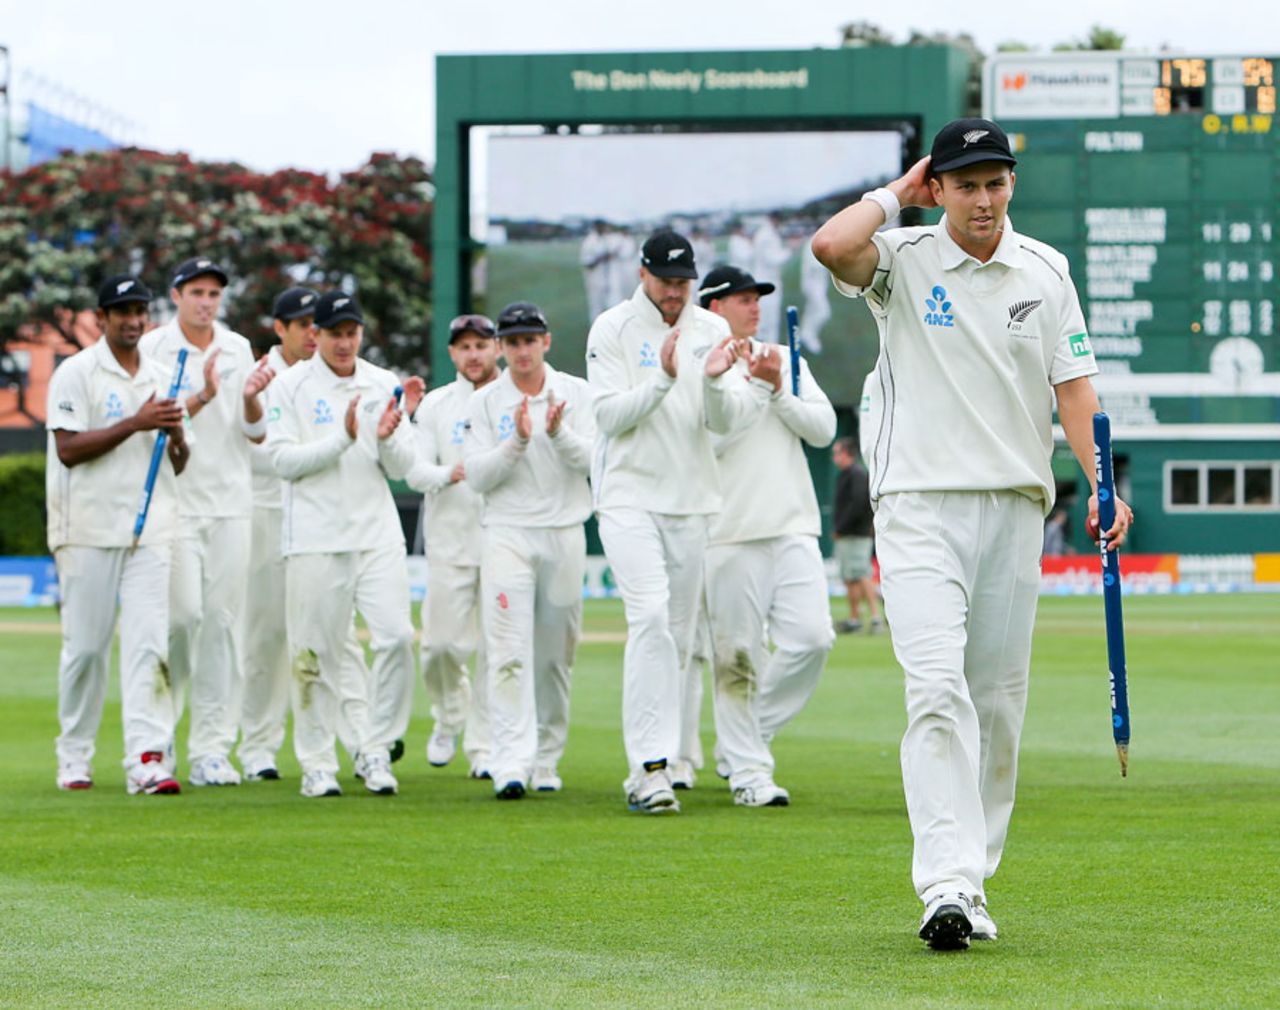 Trent Boult leads New Zealand off the field after their innings victory, New Zealand v West Indies, 2nd Test, Wellington, 3rd day, December 13, 2013